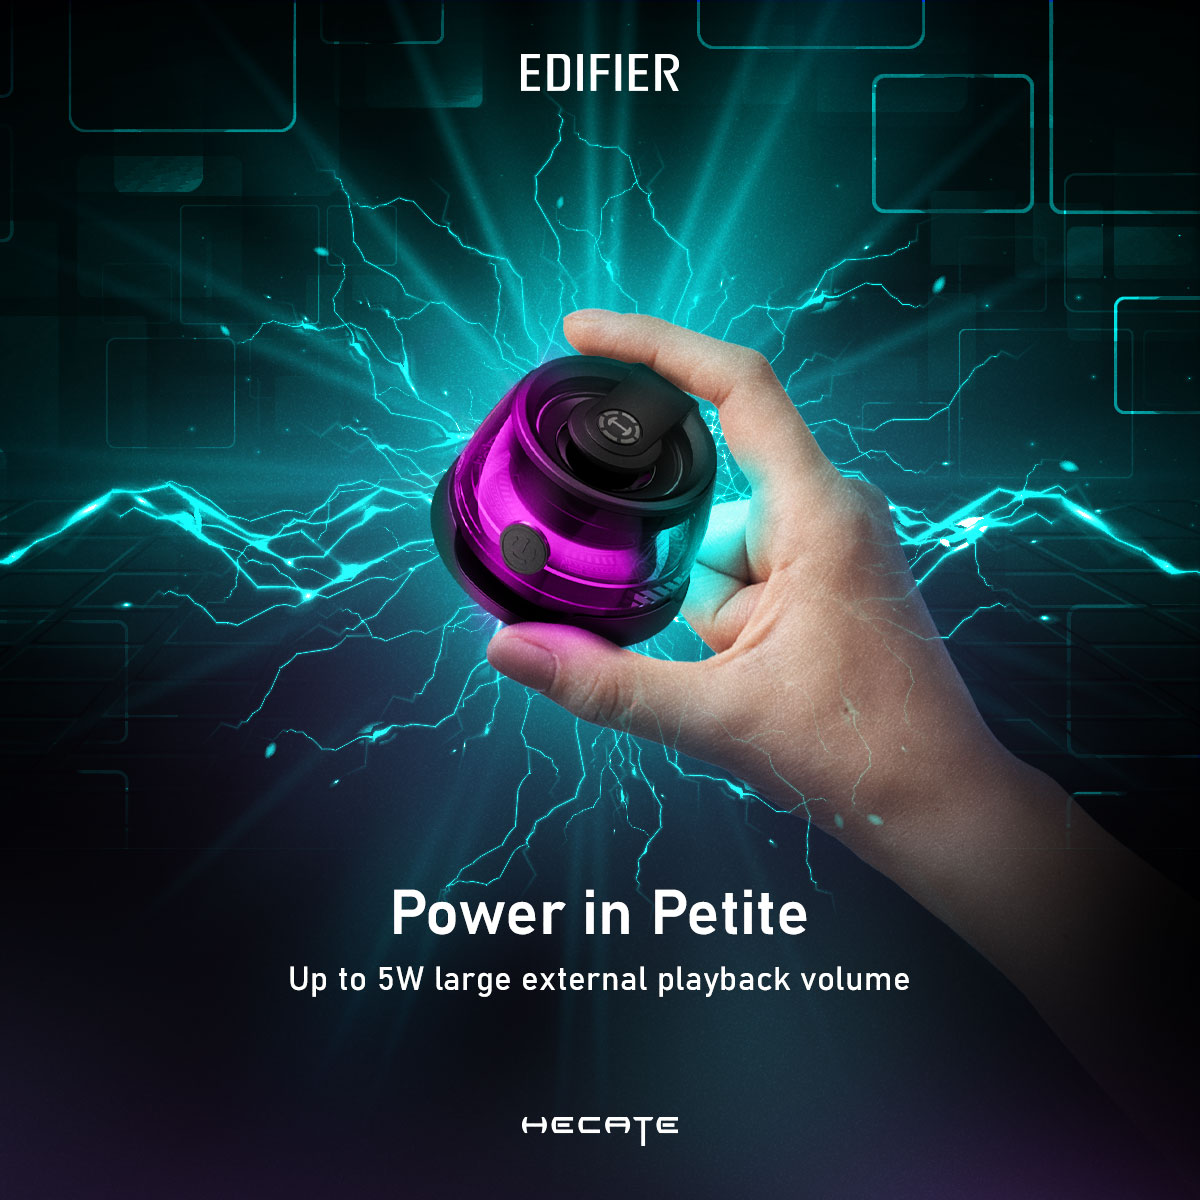 Power in Petite🚀 Unleash big sound from a compact package! With up to 5W of large external playback volume, get ready to experience music like never before. Stay tuned for the ultimate audio revolution! #HECATEG200 #HecateMalaysia #EdifierMalaysia #G200 #staytuned #RGB